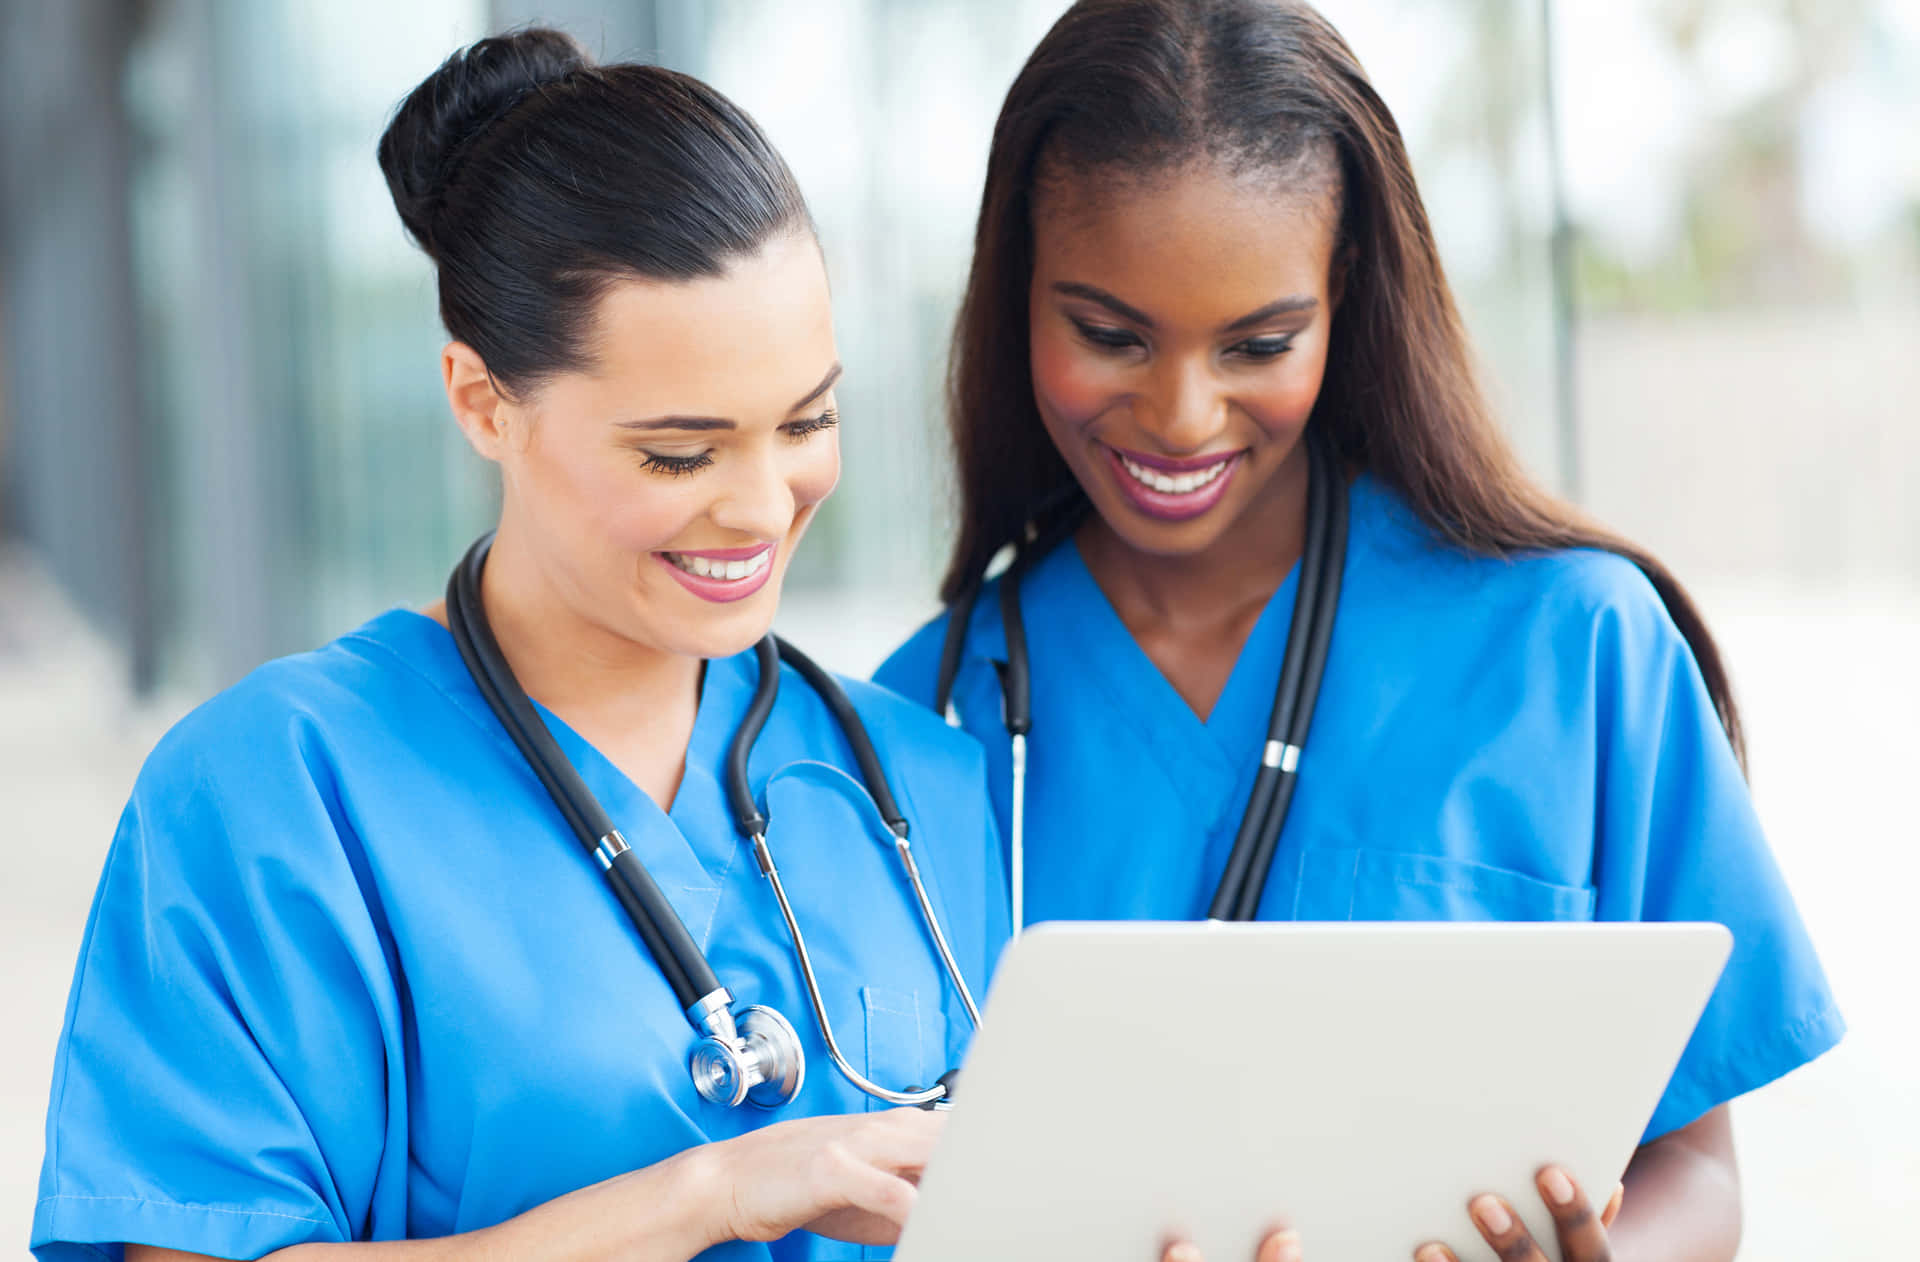 Two Nurses Are Looking At A Laptop